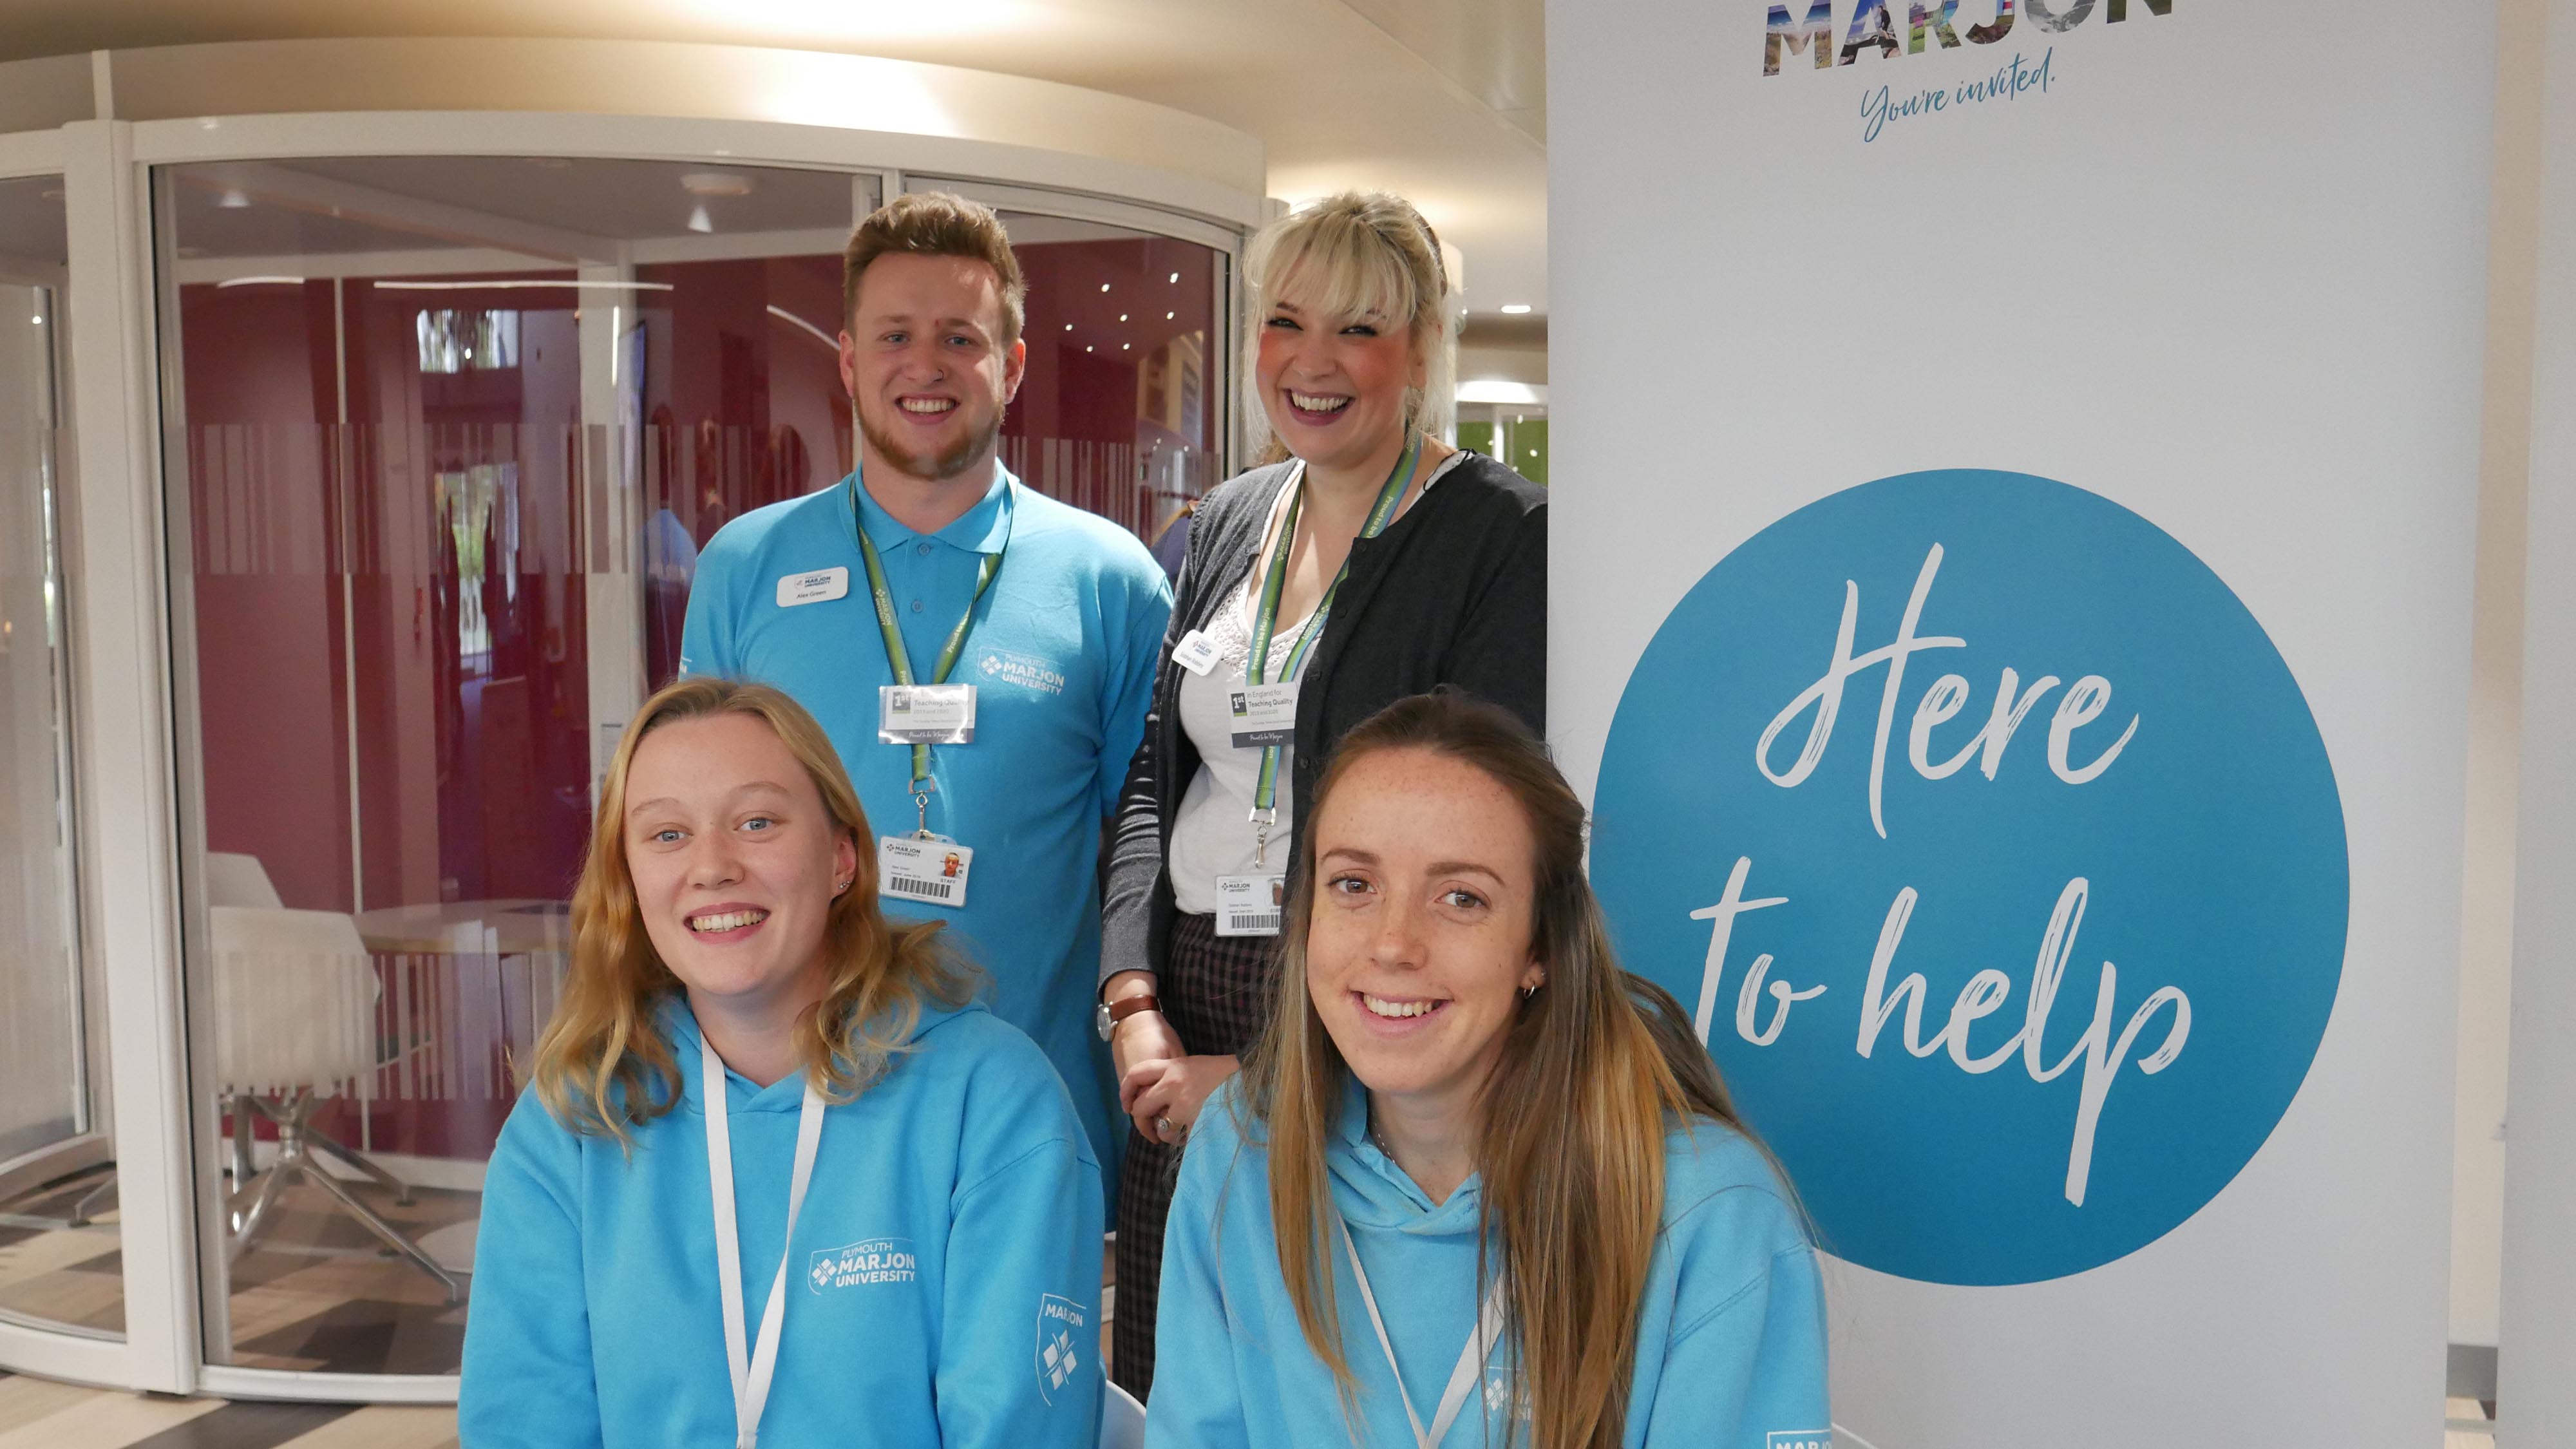 Students and staff next to a 'here on help' sign